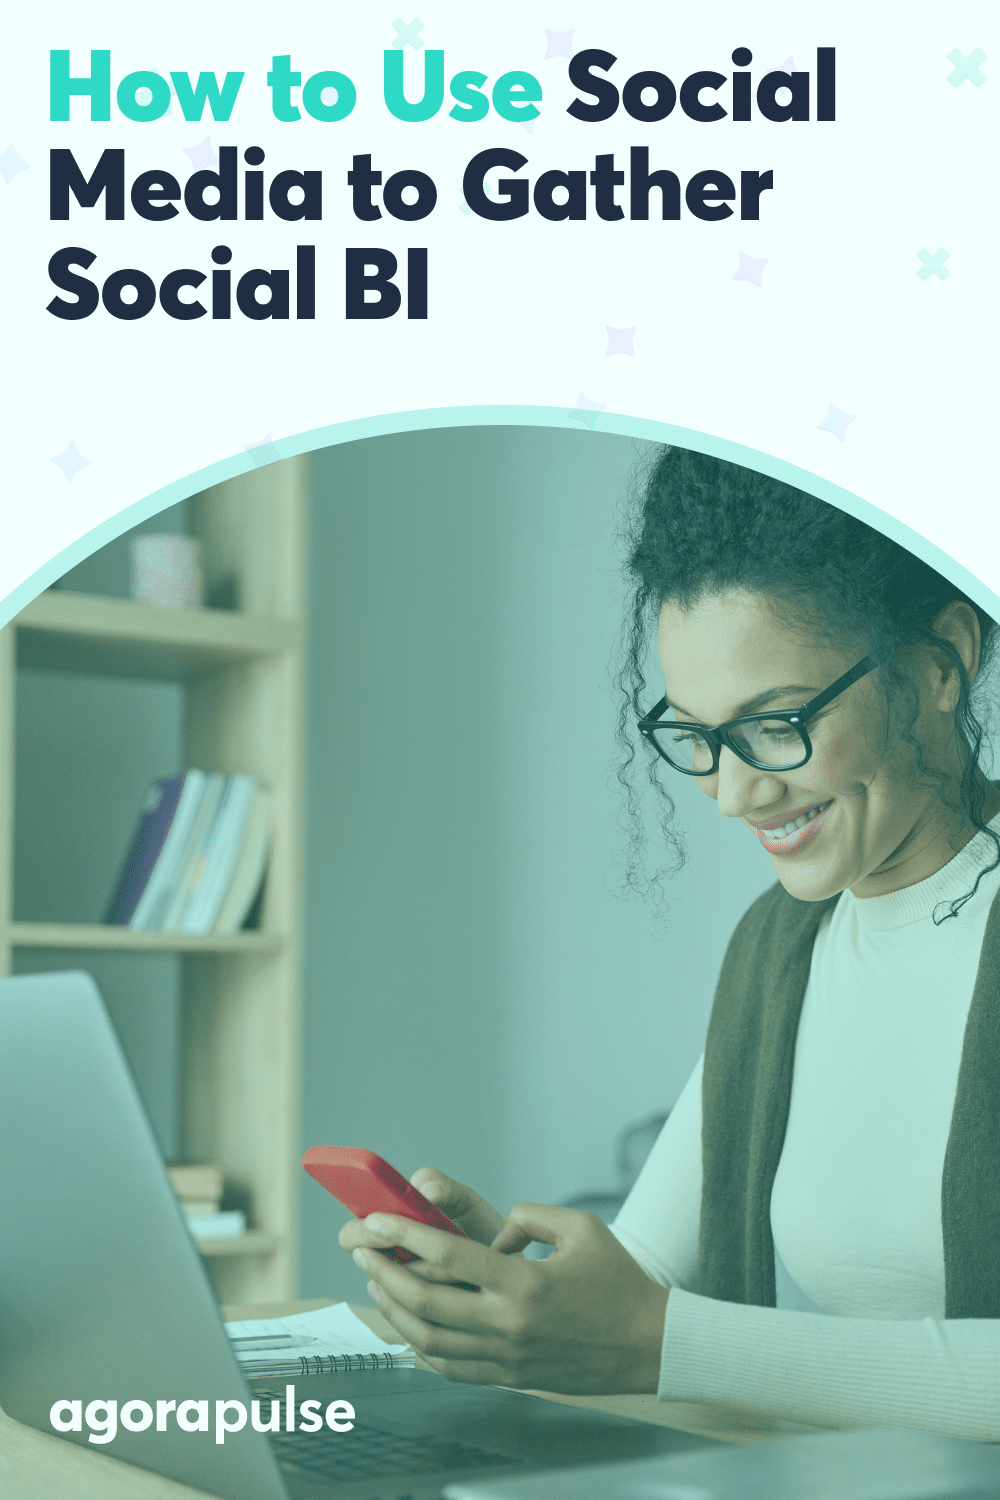 Social Business Intelligence: How to Use Social Media to Gather Social BI